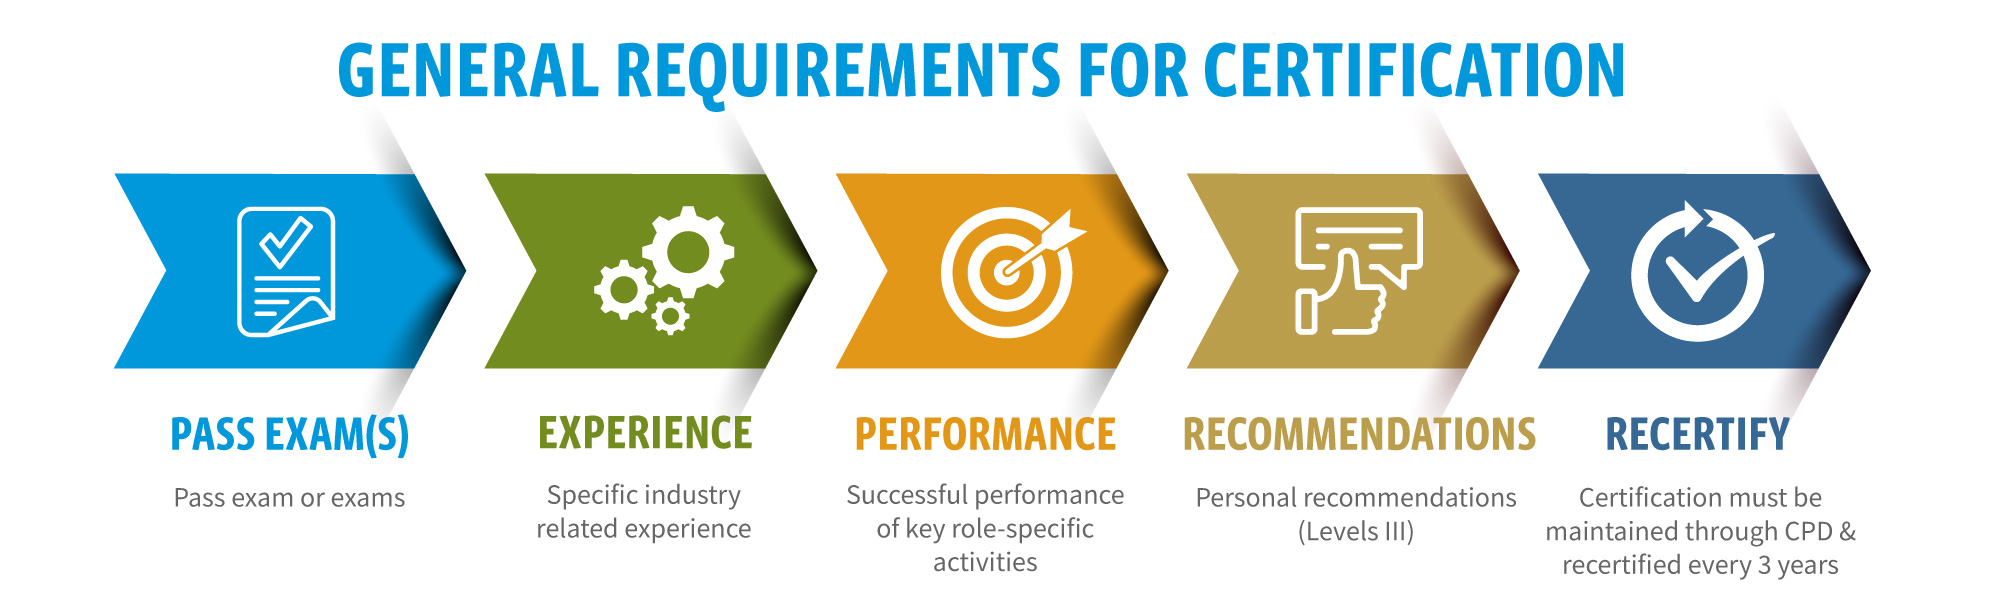 General Requirements for Certification